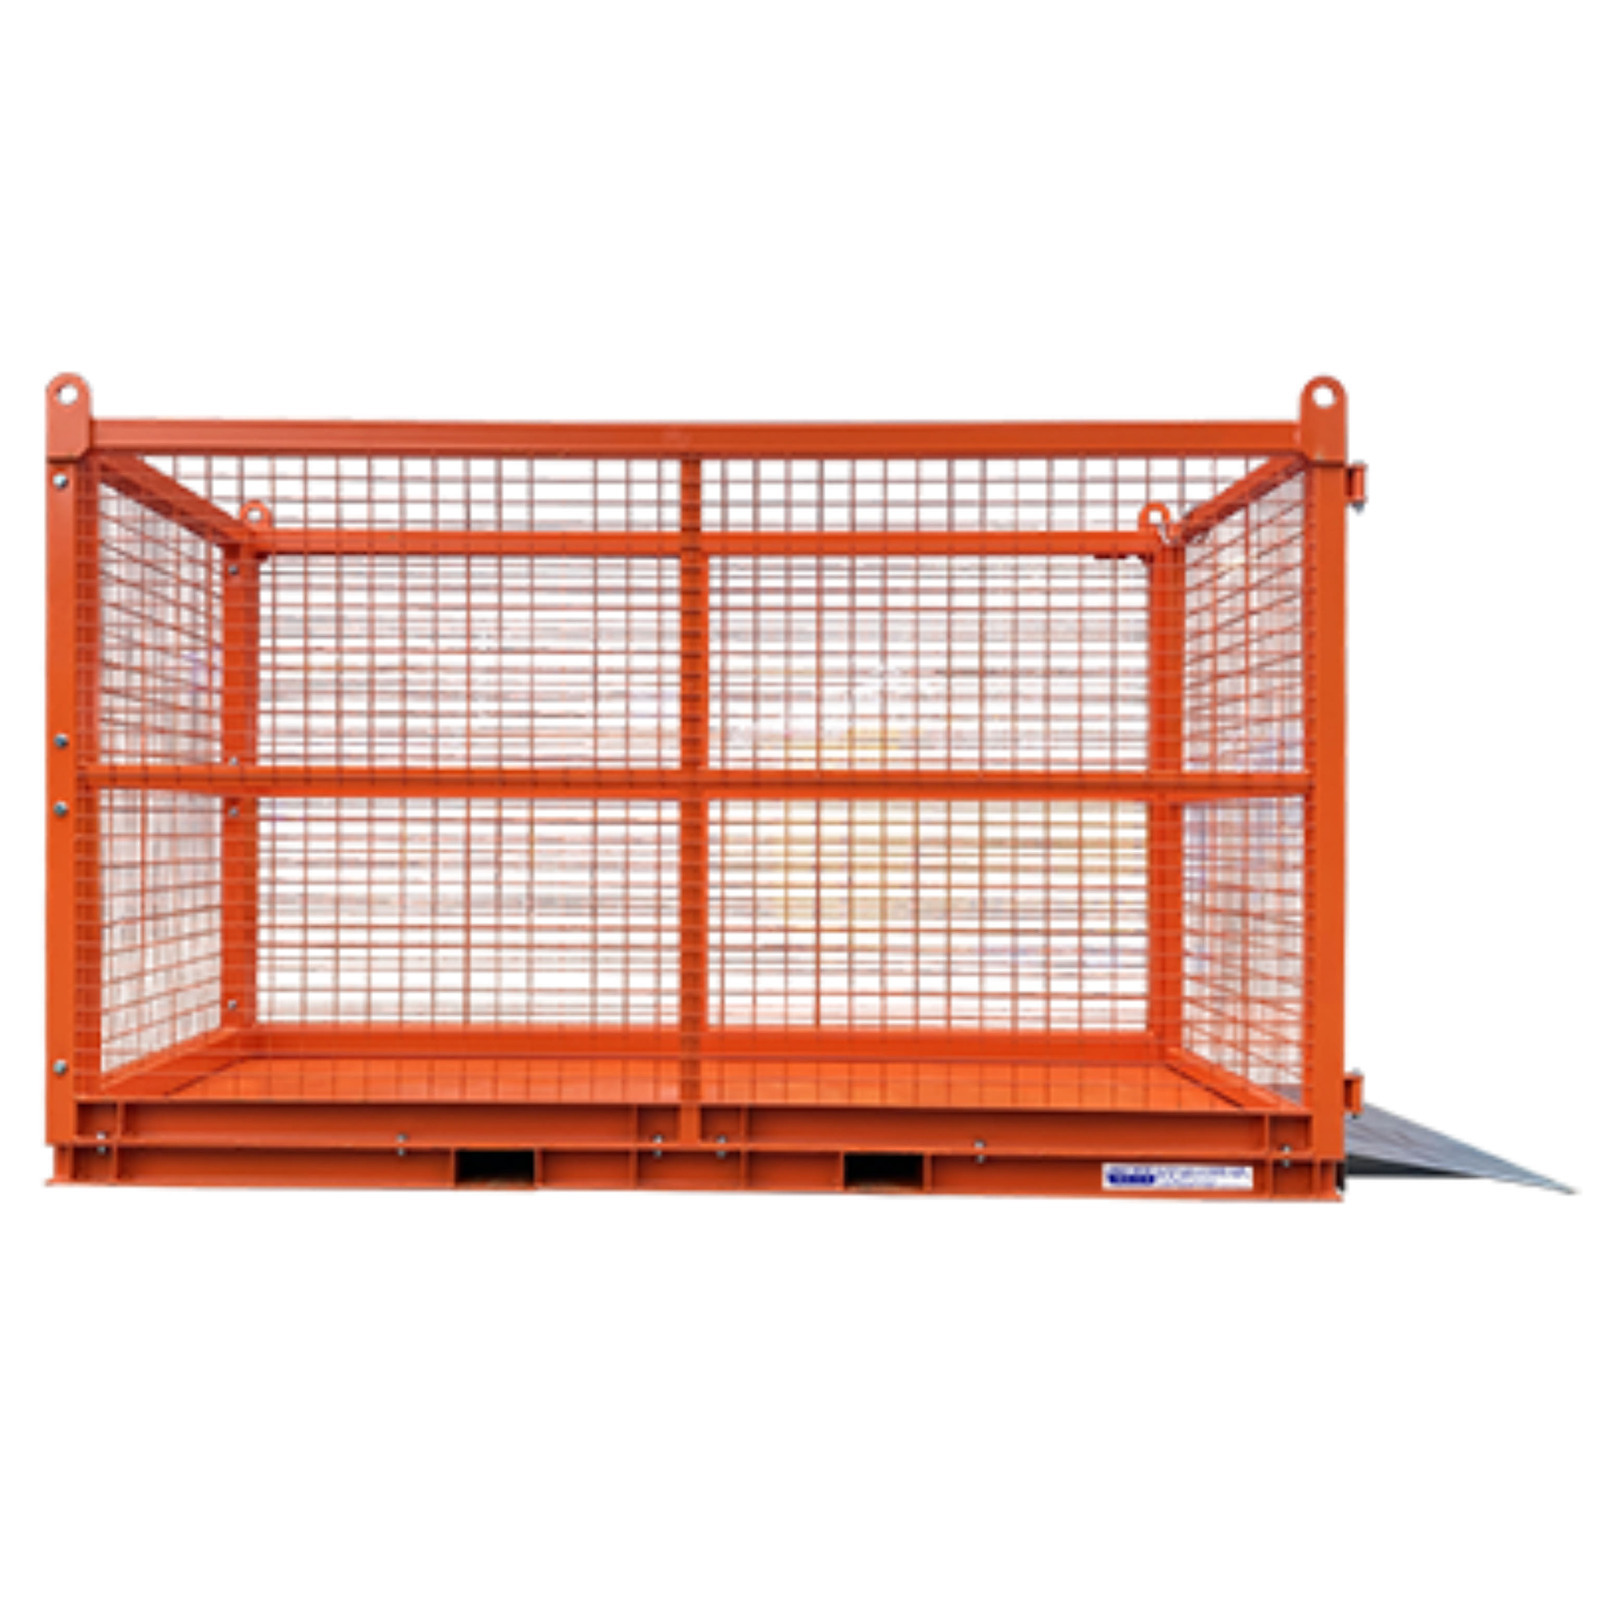 Oversized Transport Cage with Ramp